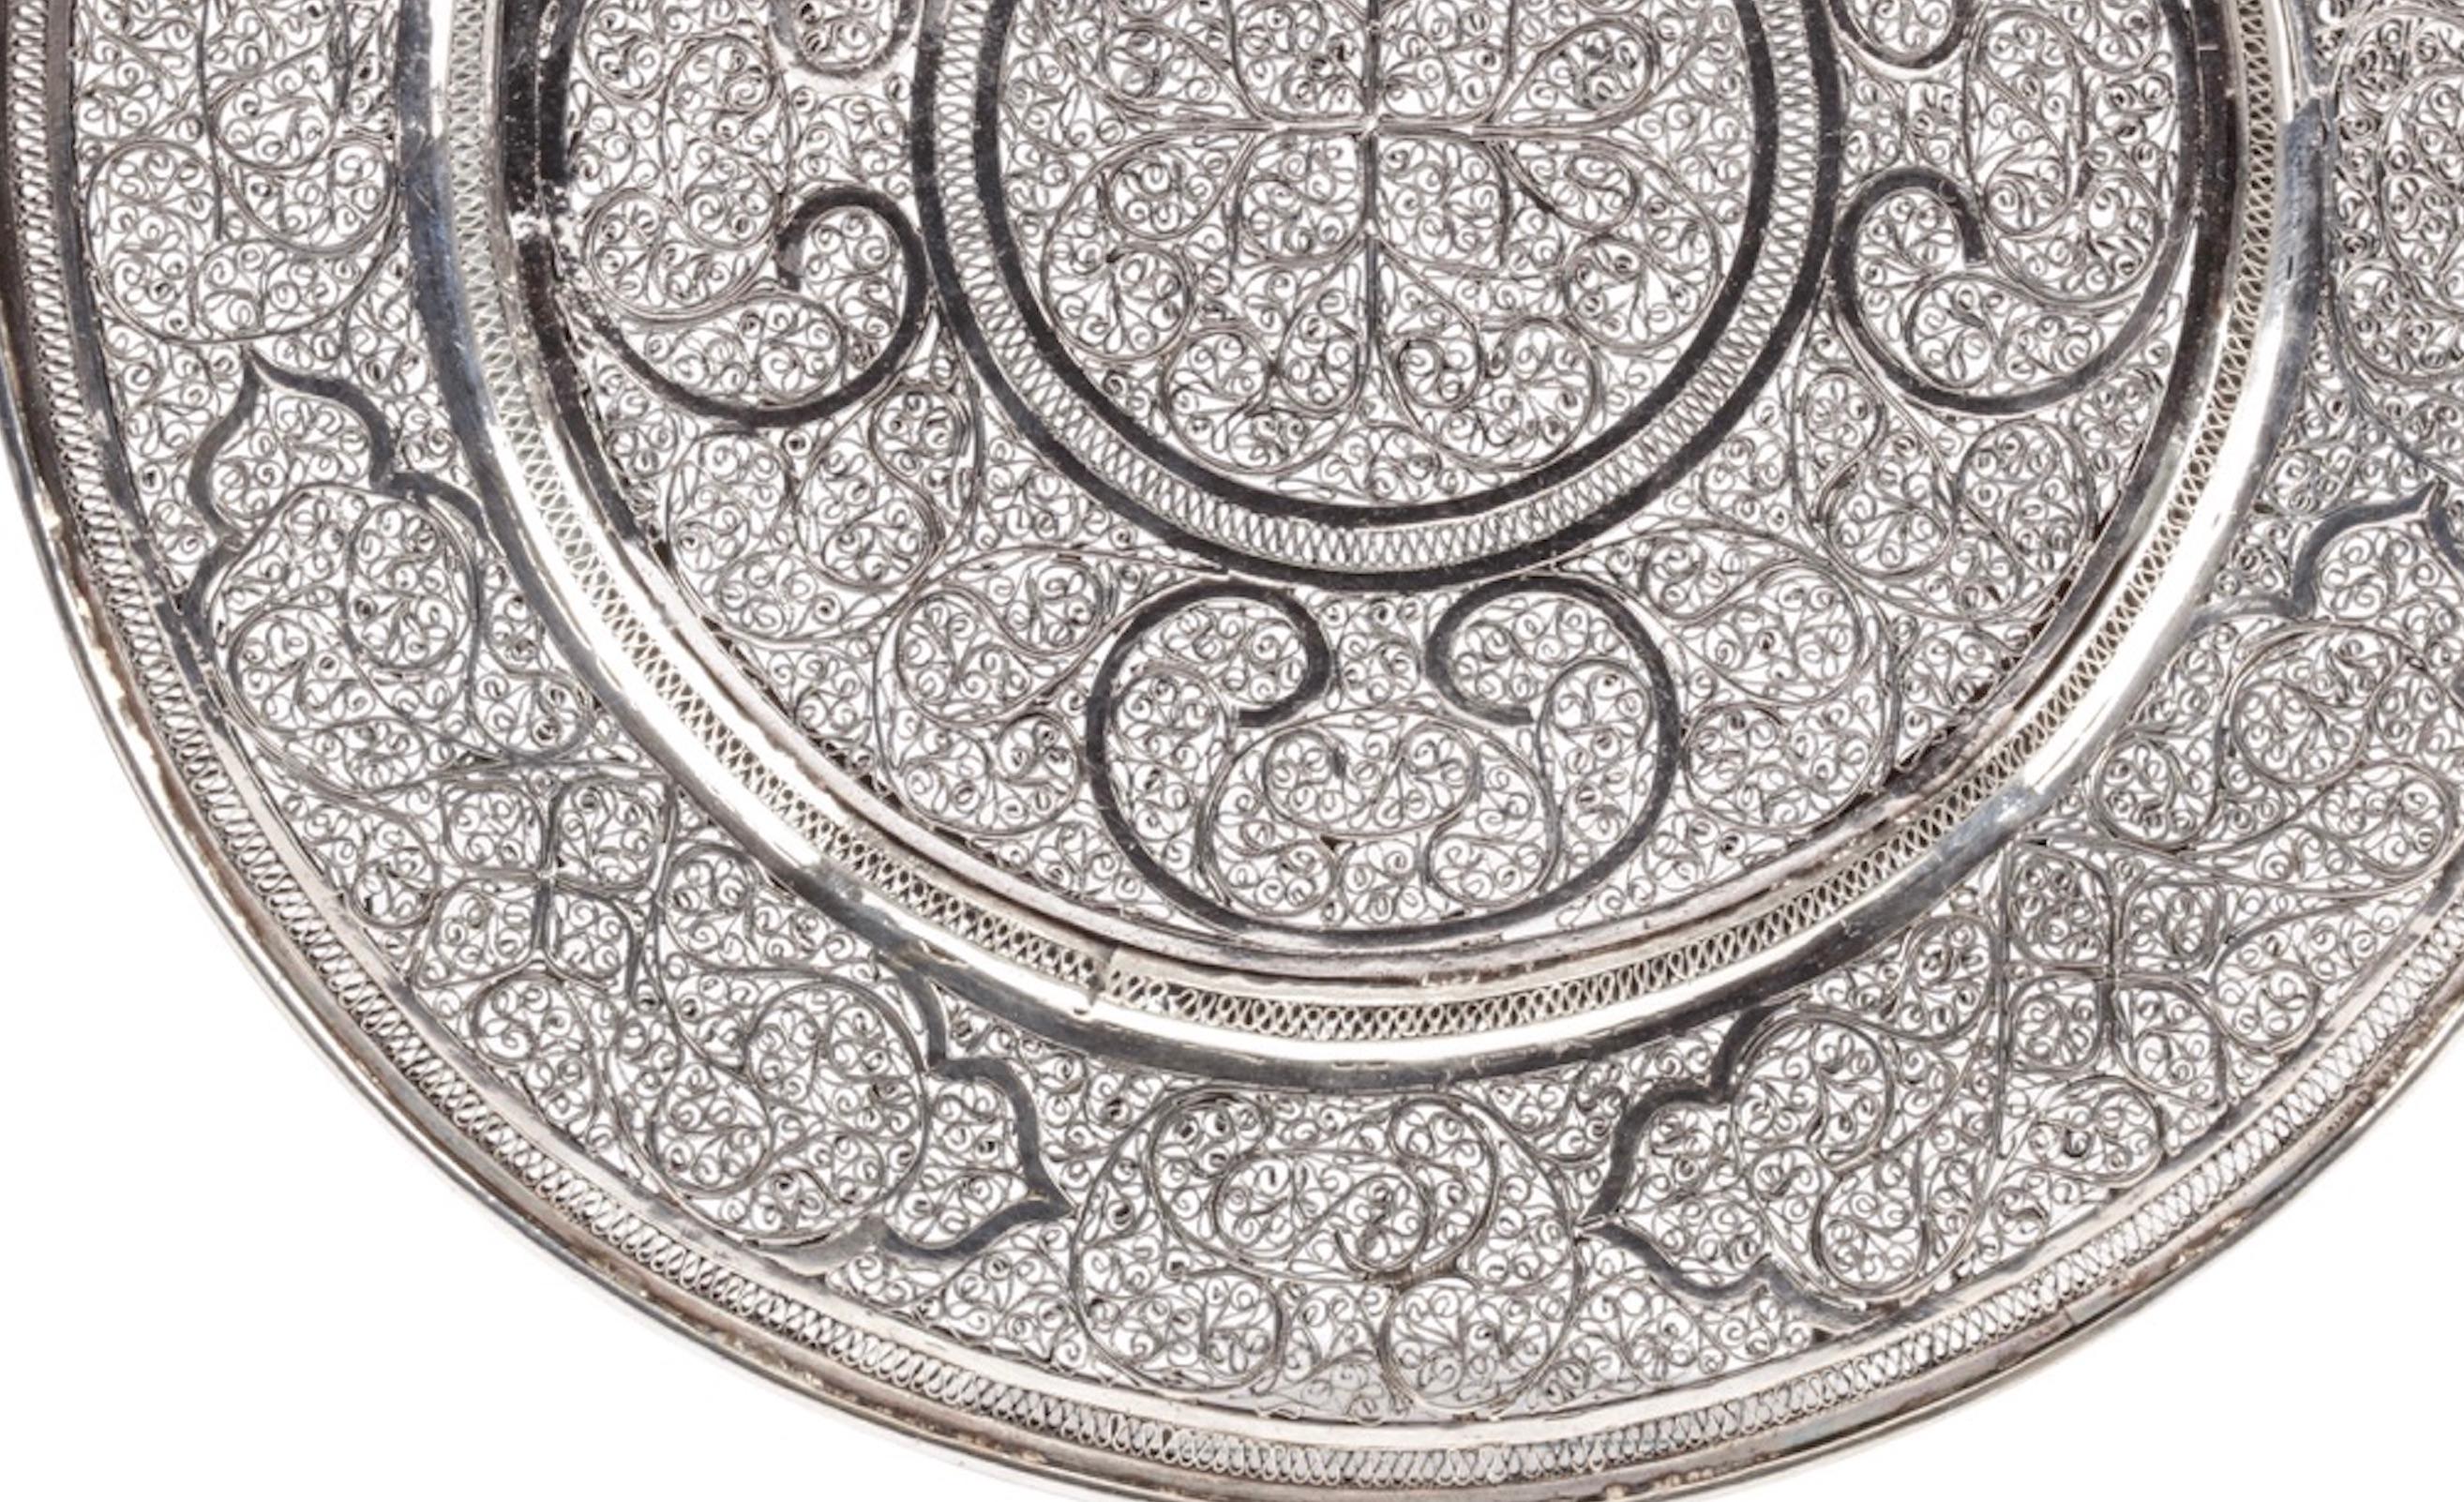 Indonesian Splendid and Heavy Late 17th Century Dutch-Colonial Silver Filigree Salver For Sale